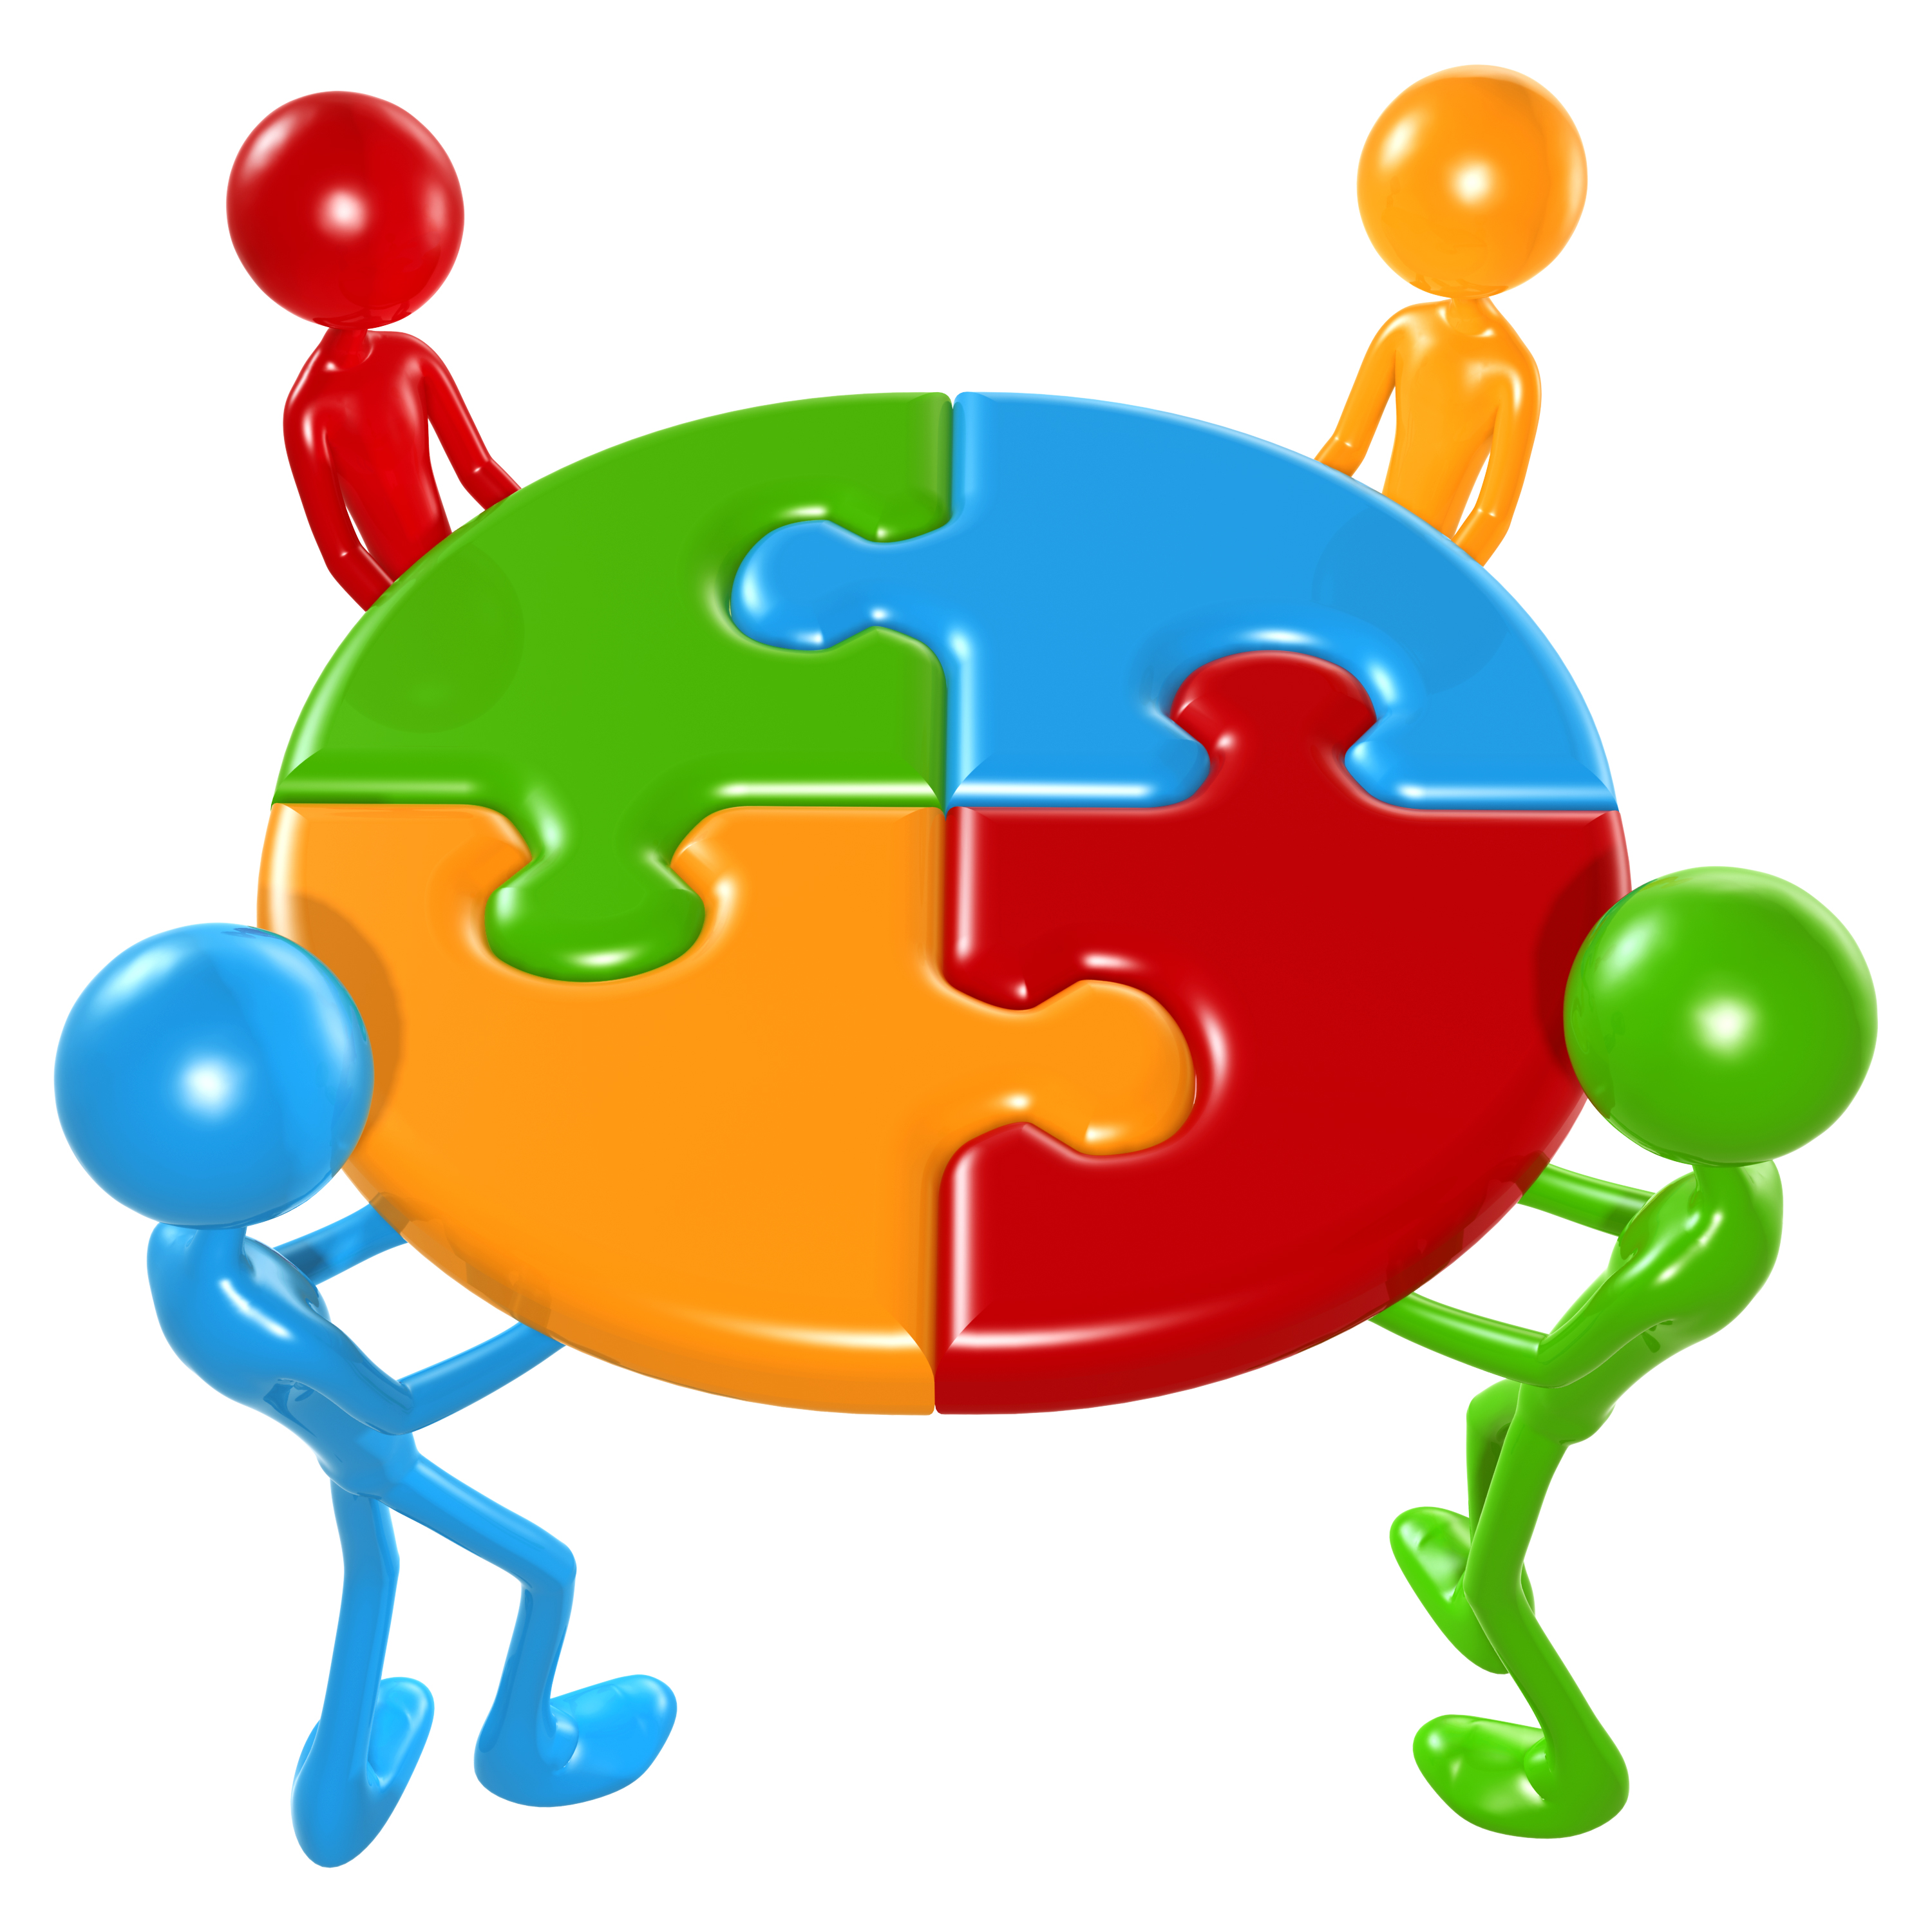 Teamwork images free clipart